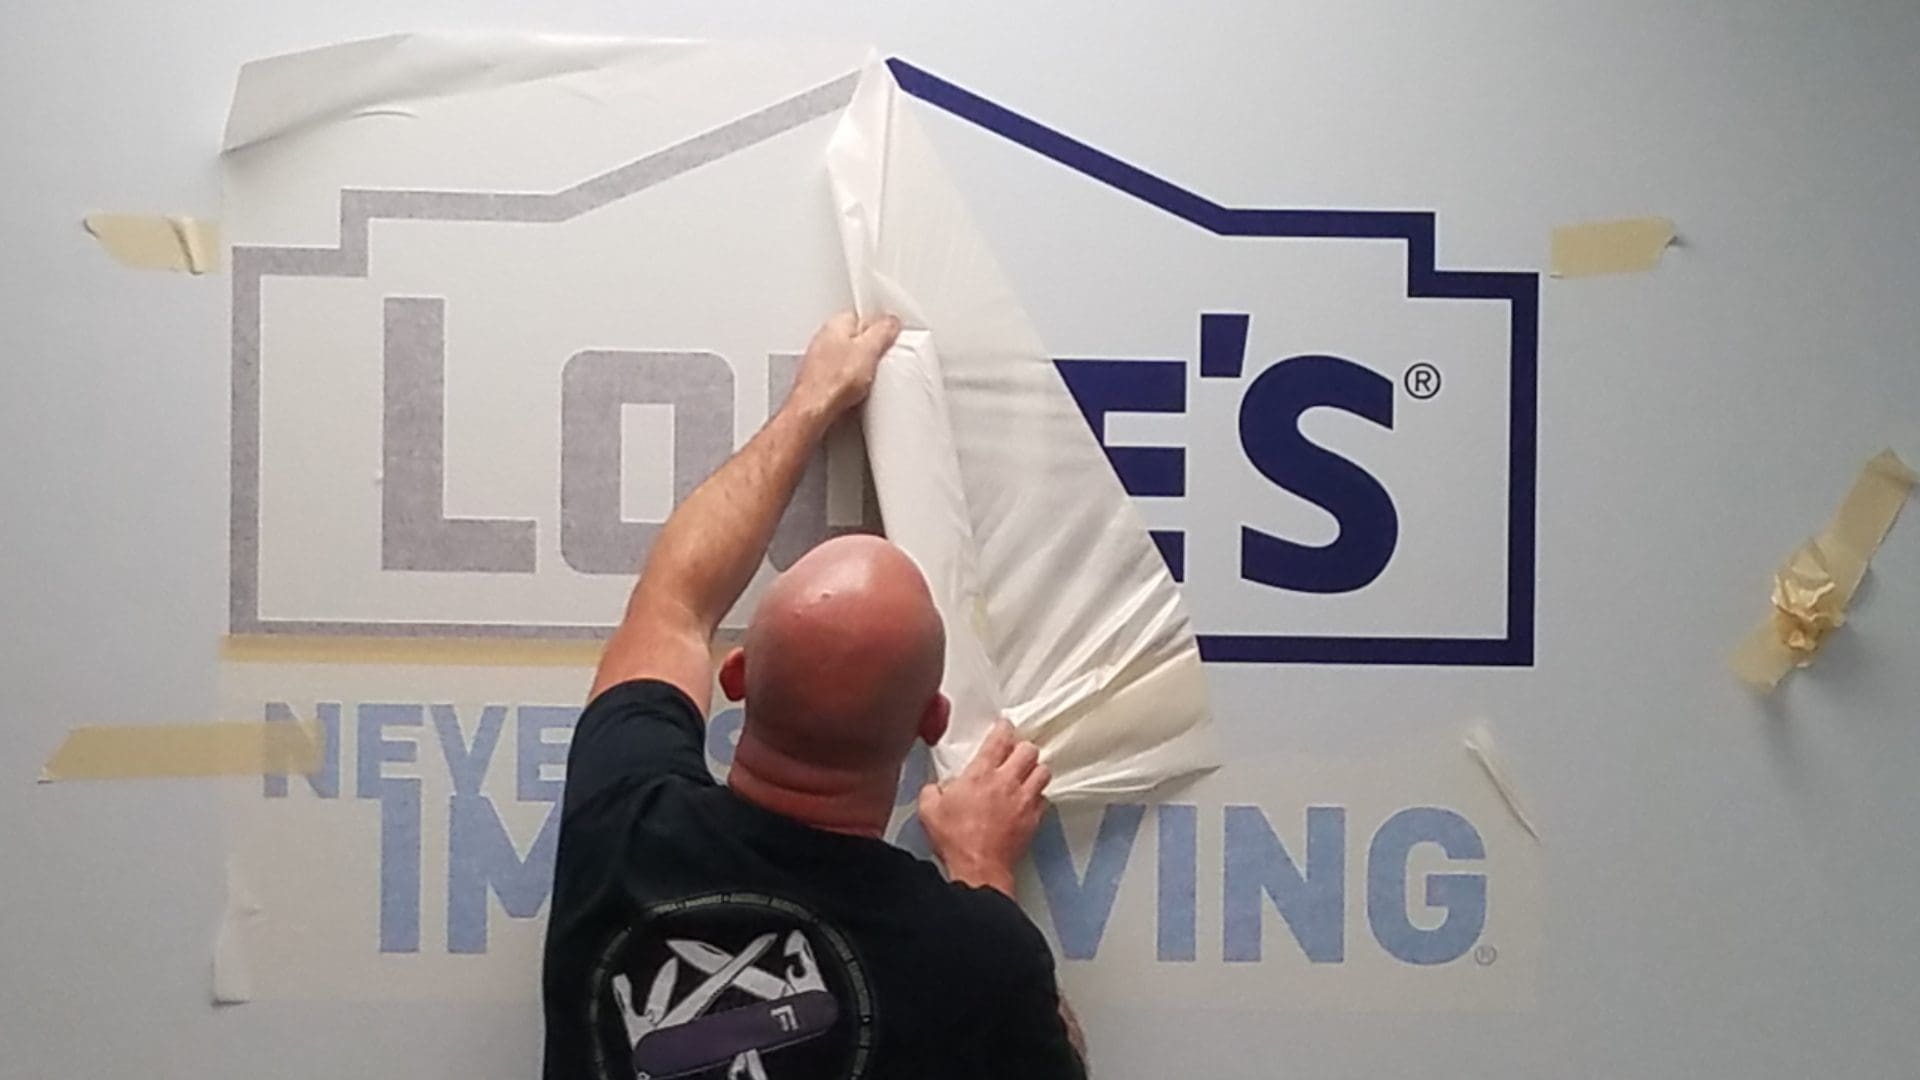 Lowes - Vinyl Wall Graphics (3)